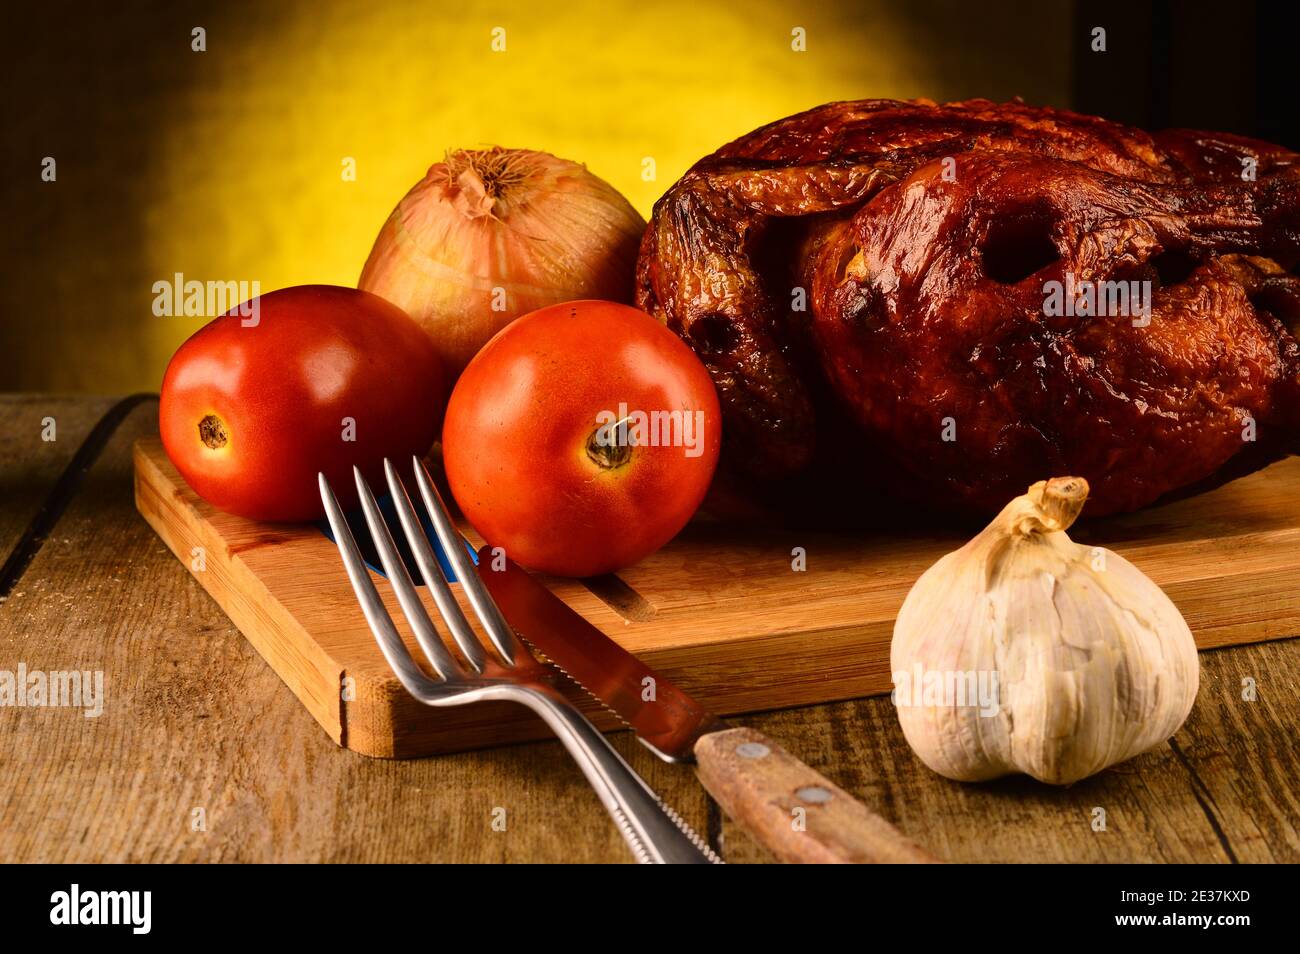 Roasted chicken on the table, lunch time Stock Photo